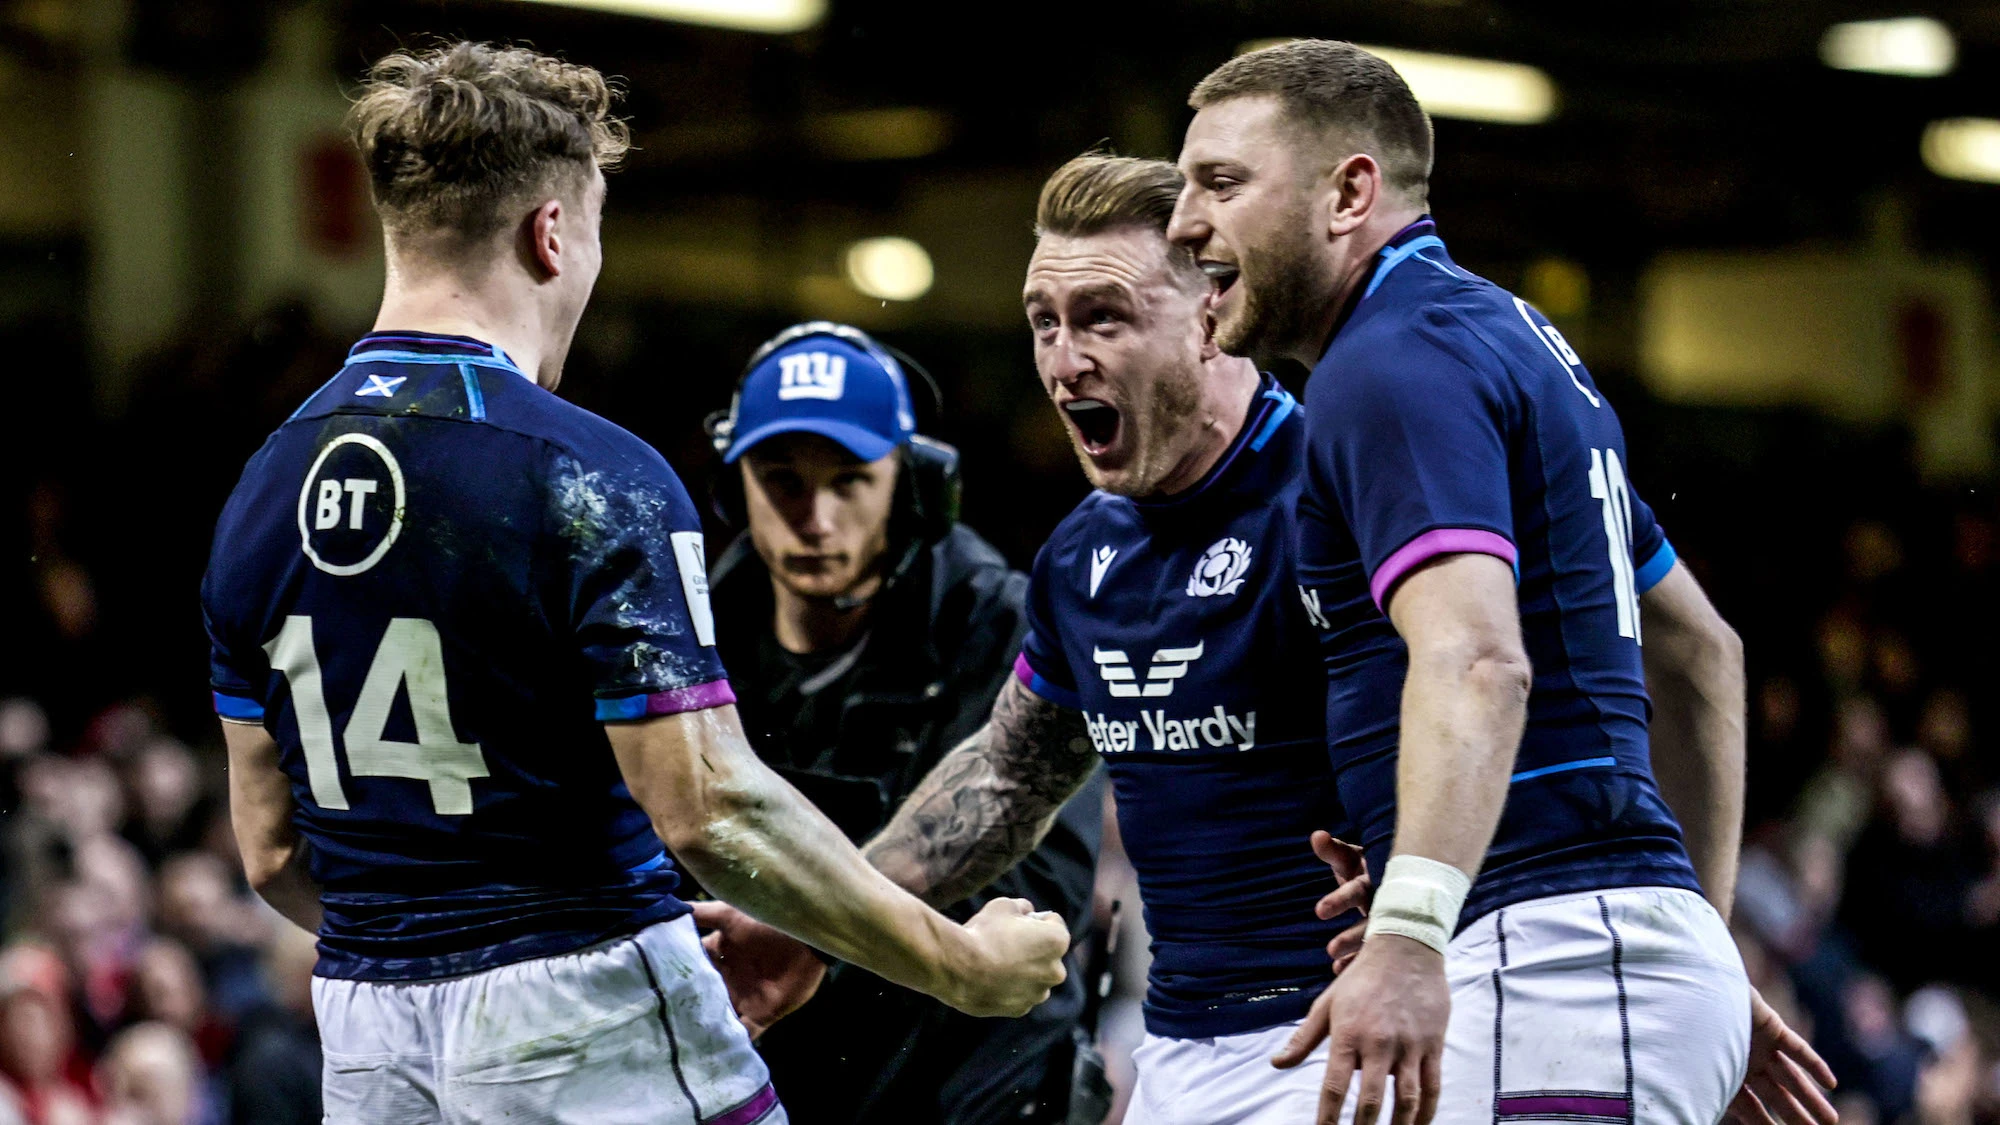 Darcy Graham celebrates scoring their first try with Stuart Hogg and Finn Russell 12/2/2022